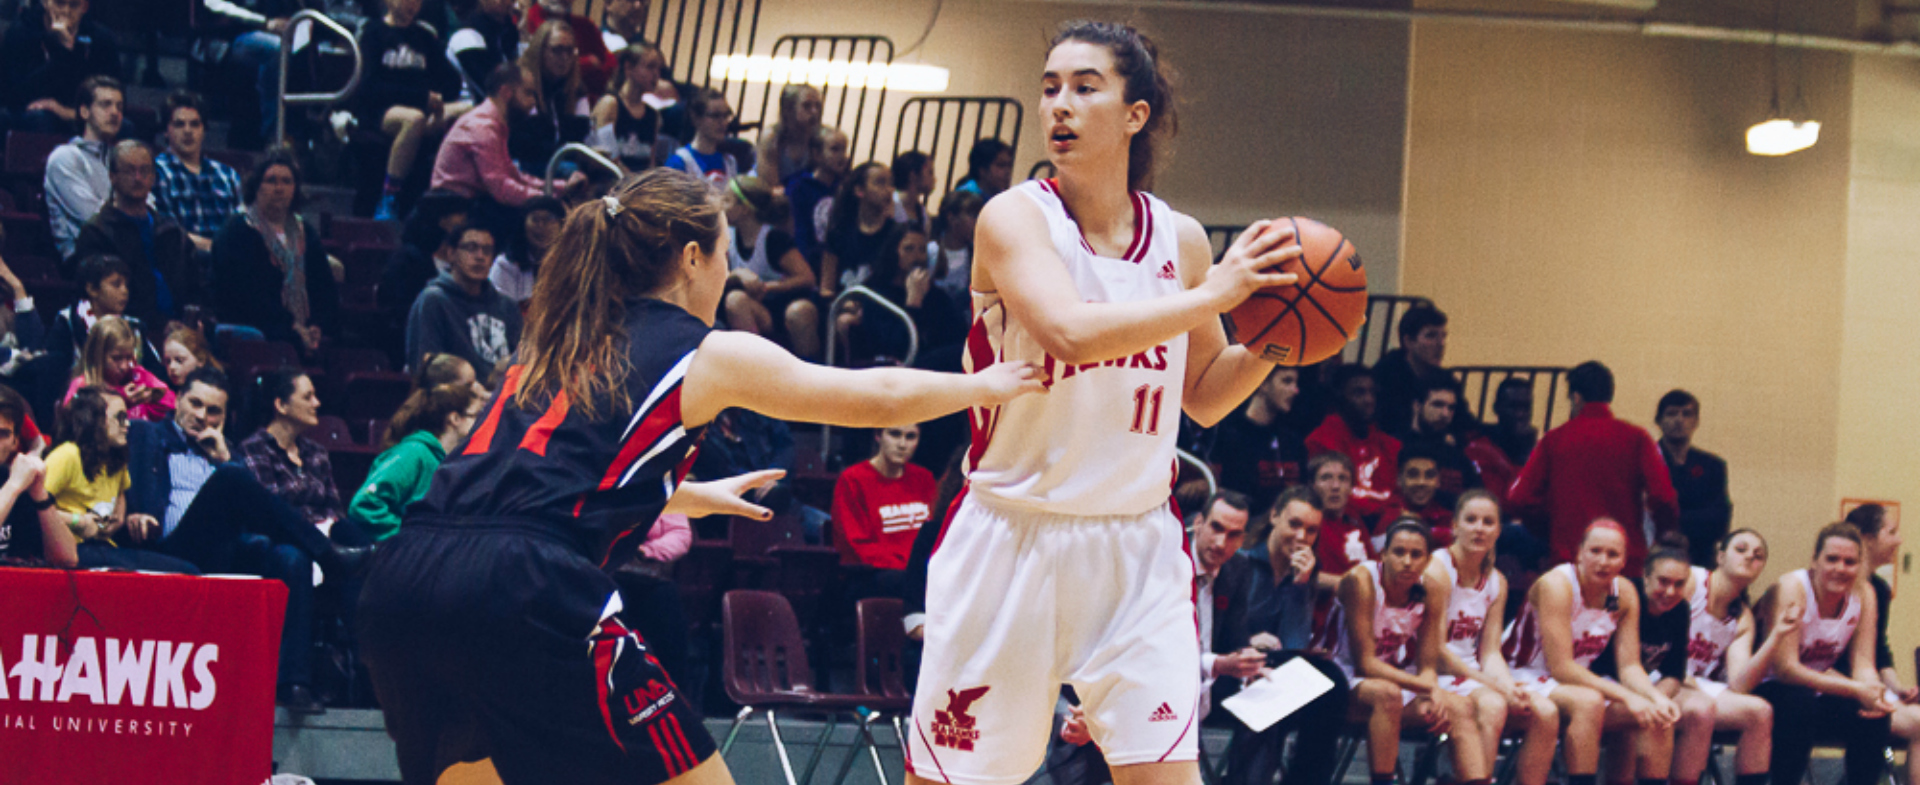 Sea-Hawks Host Panthers in Final Home Games